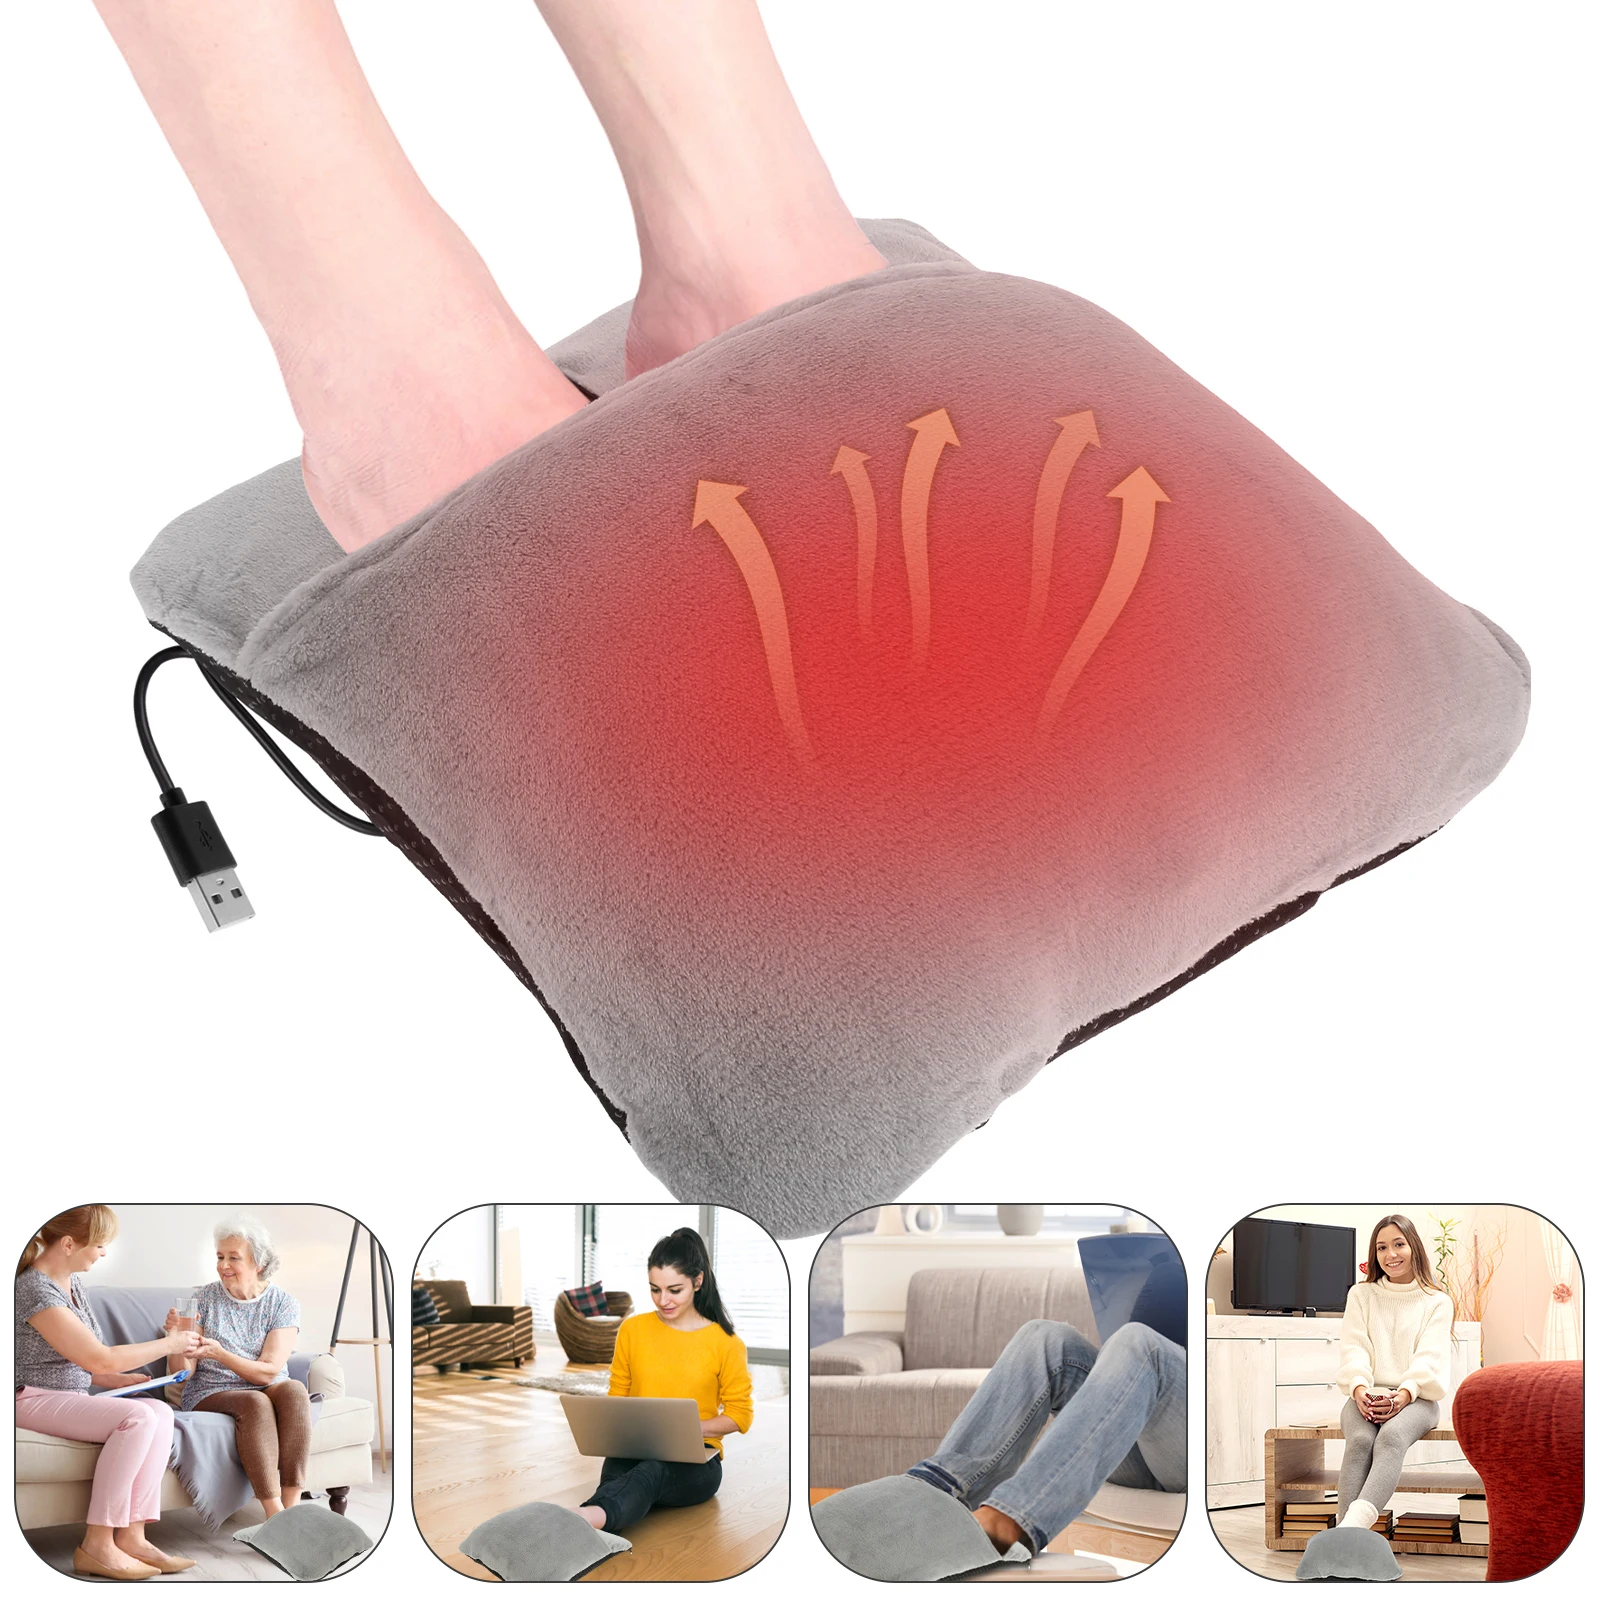 

New Electric Heated Foot Warmers 3 Modes Fast Heating Foot Heater Soft Comfortable Foot Heating Pad USB Powered Portable Foot